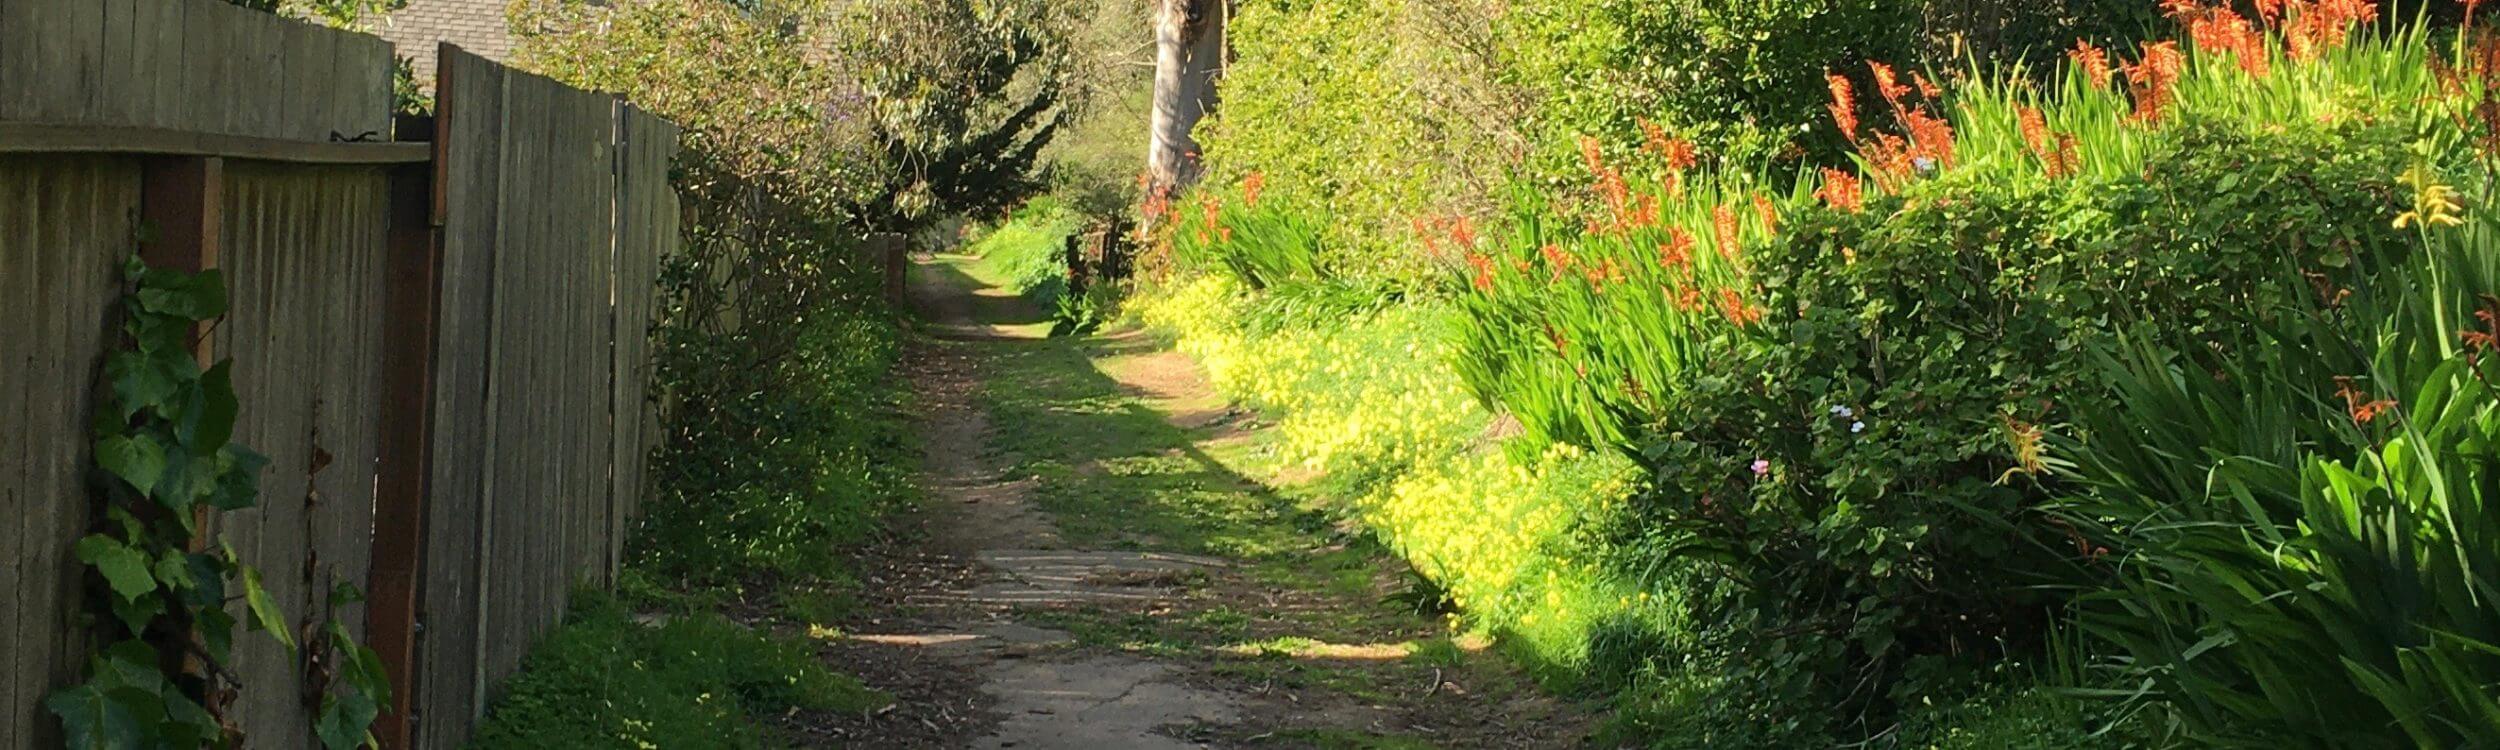 13 unpaved roads and alleys to walk in San Francisco